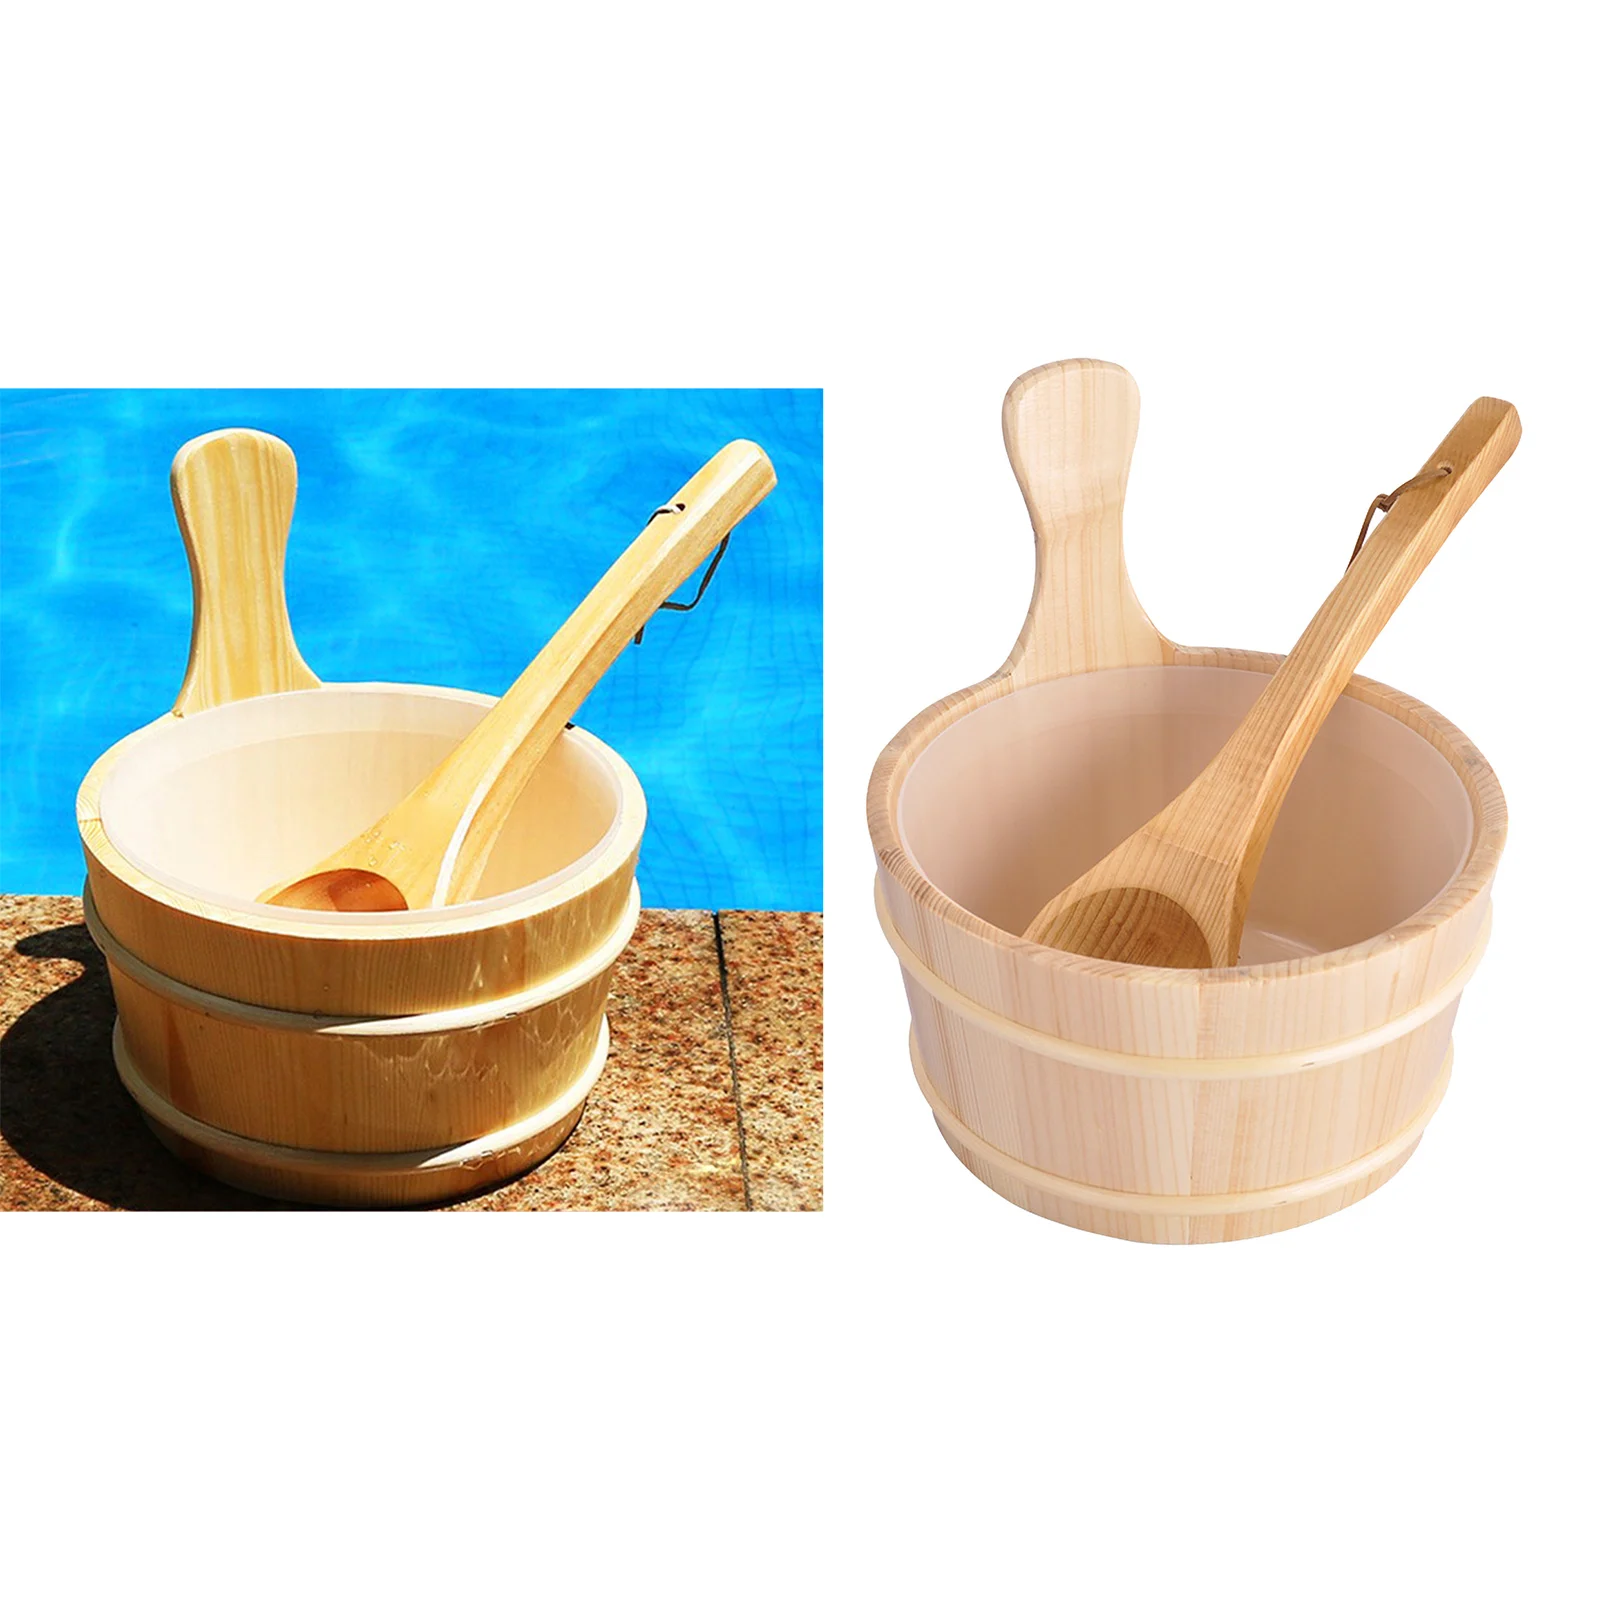 4L Sauna Large Capacity Wooden Bucket And Ladle Kit Steaming Bathroom Equipment Accessories For Sauna Room Tools